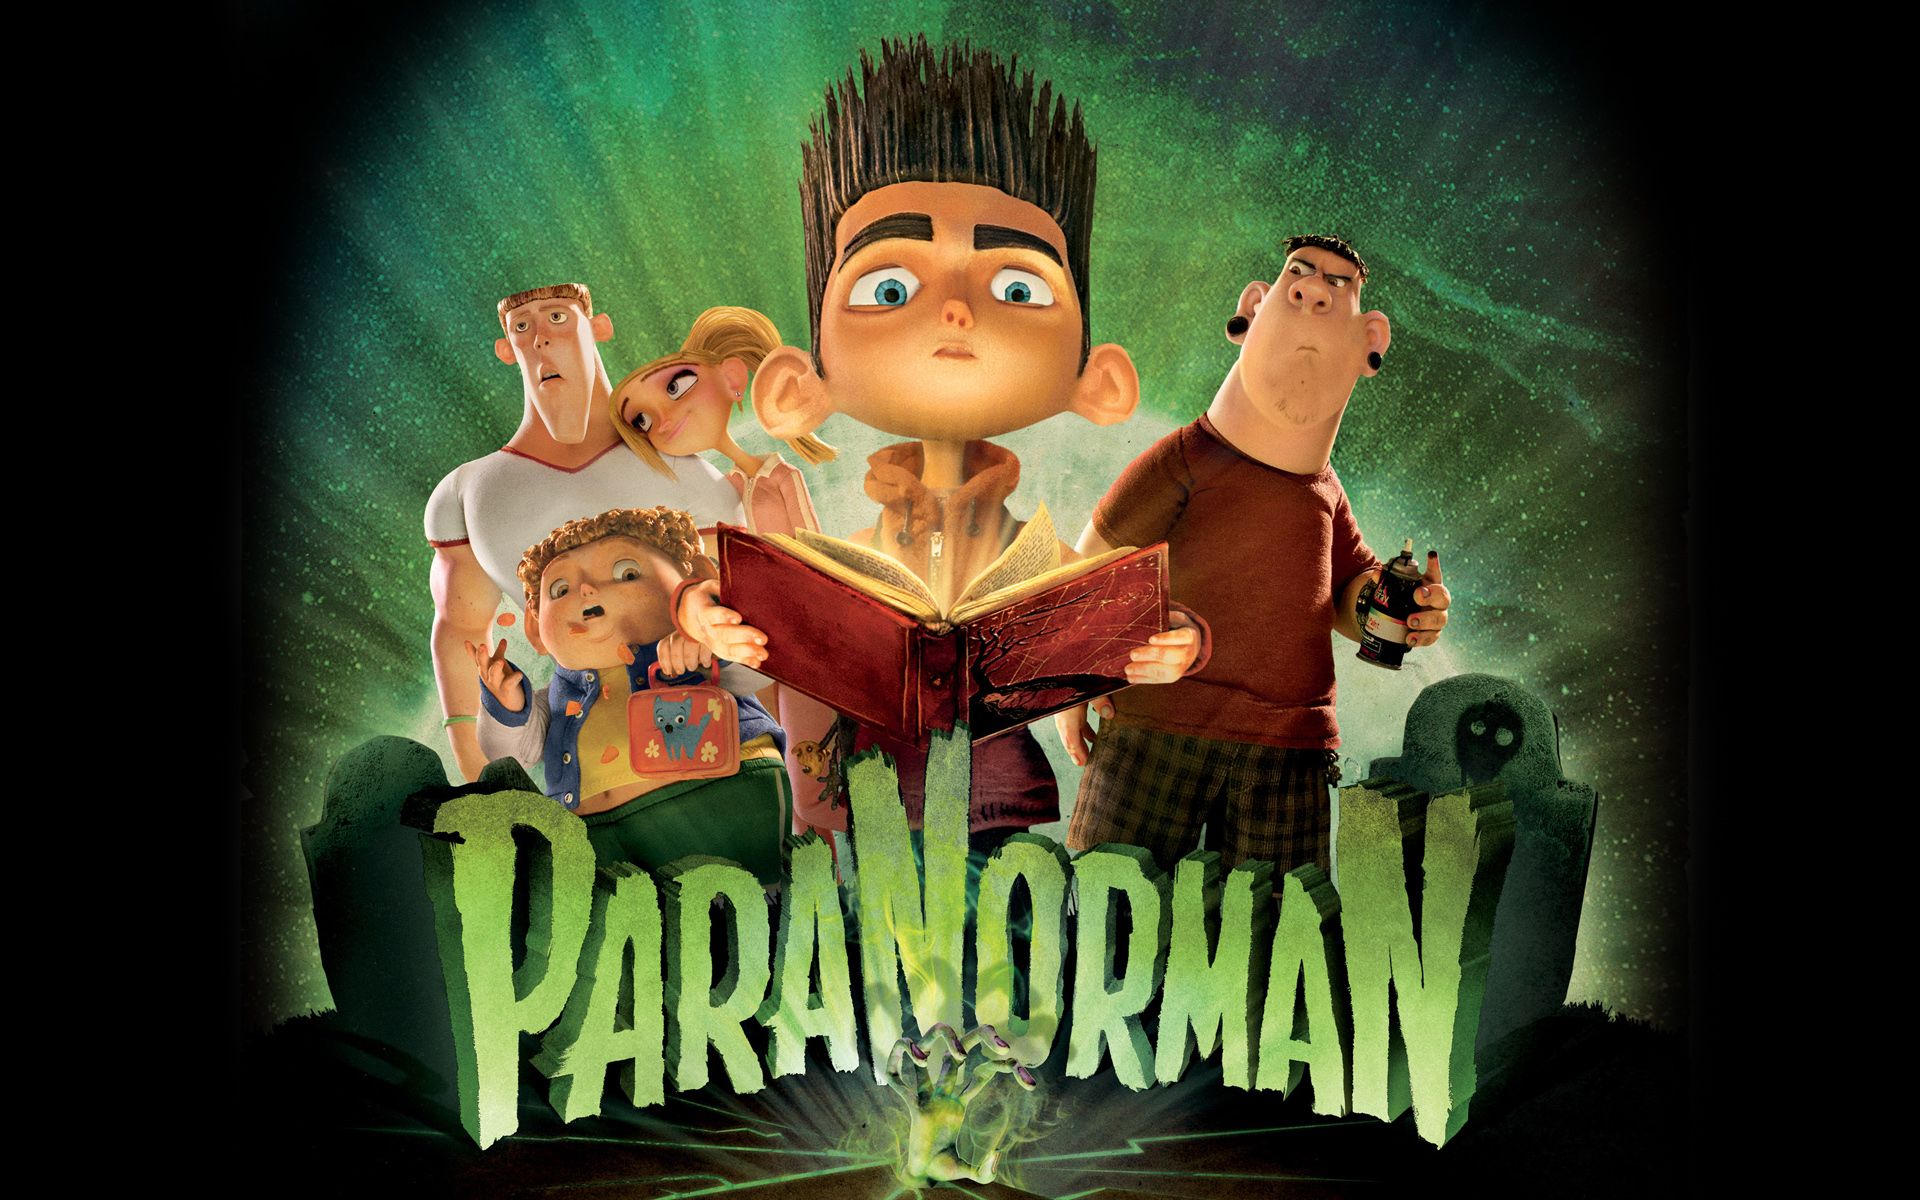 paranorman wallpaper background, wallpapers